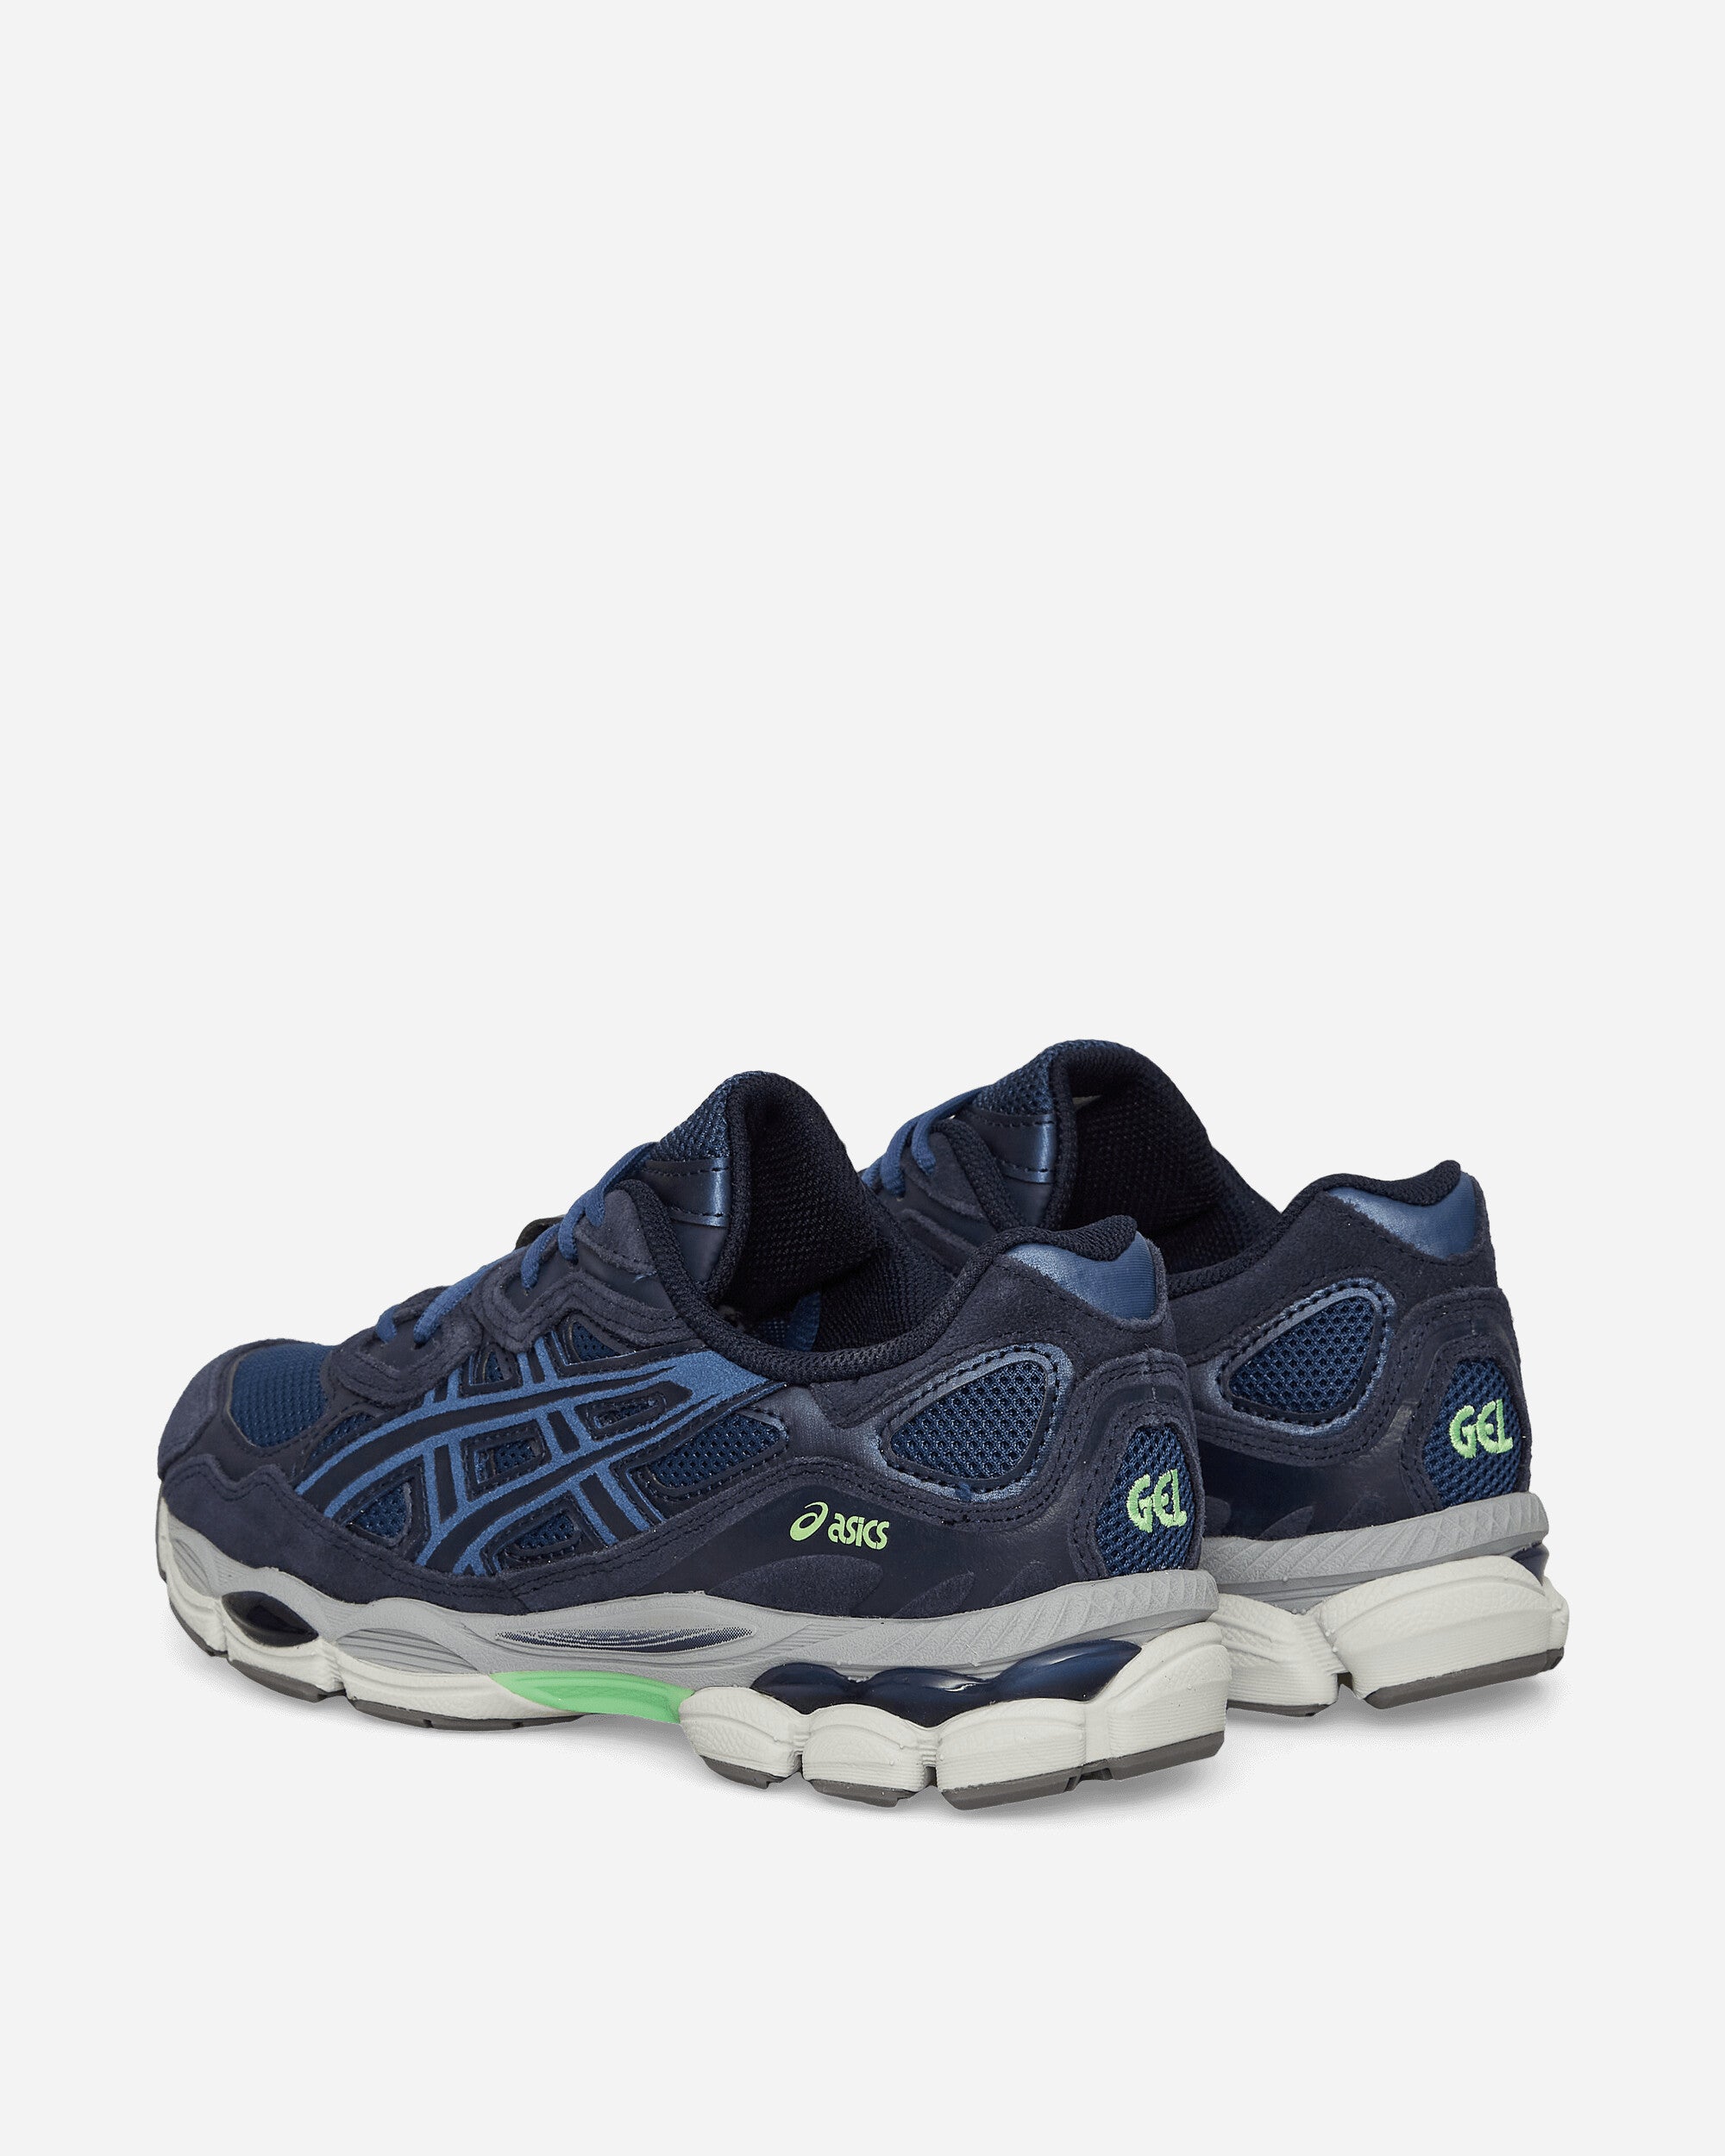 Asics Gel-Nyc Midnight Blue/Midnight Sneakers Low 1201A789-400